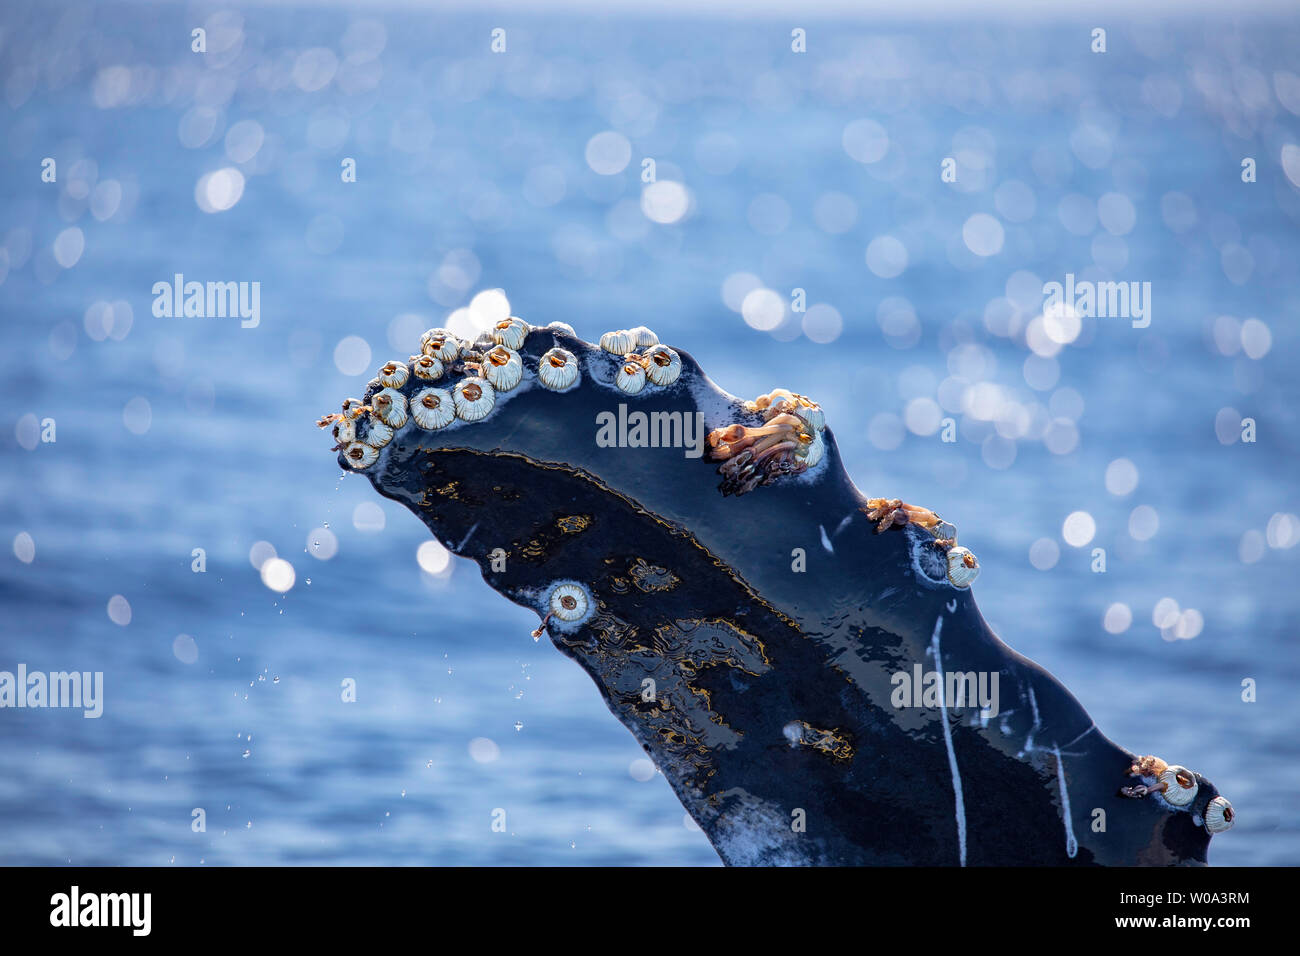 Acorn barnacles, Coronula diaderma, and goose neck barnacles, Conchorderma auritum, attached to the pectoral fin of a humpback whale, Megaptera novaea Stock Photo